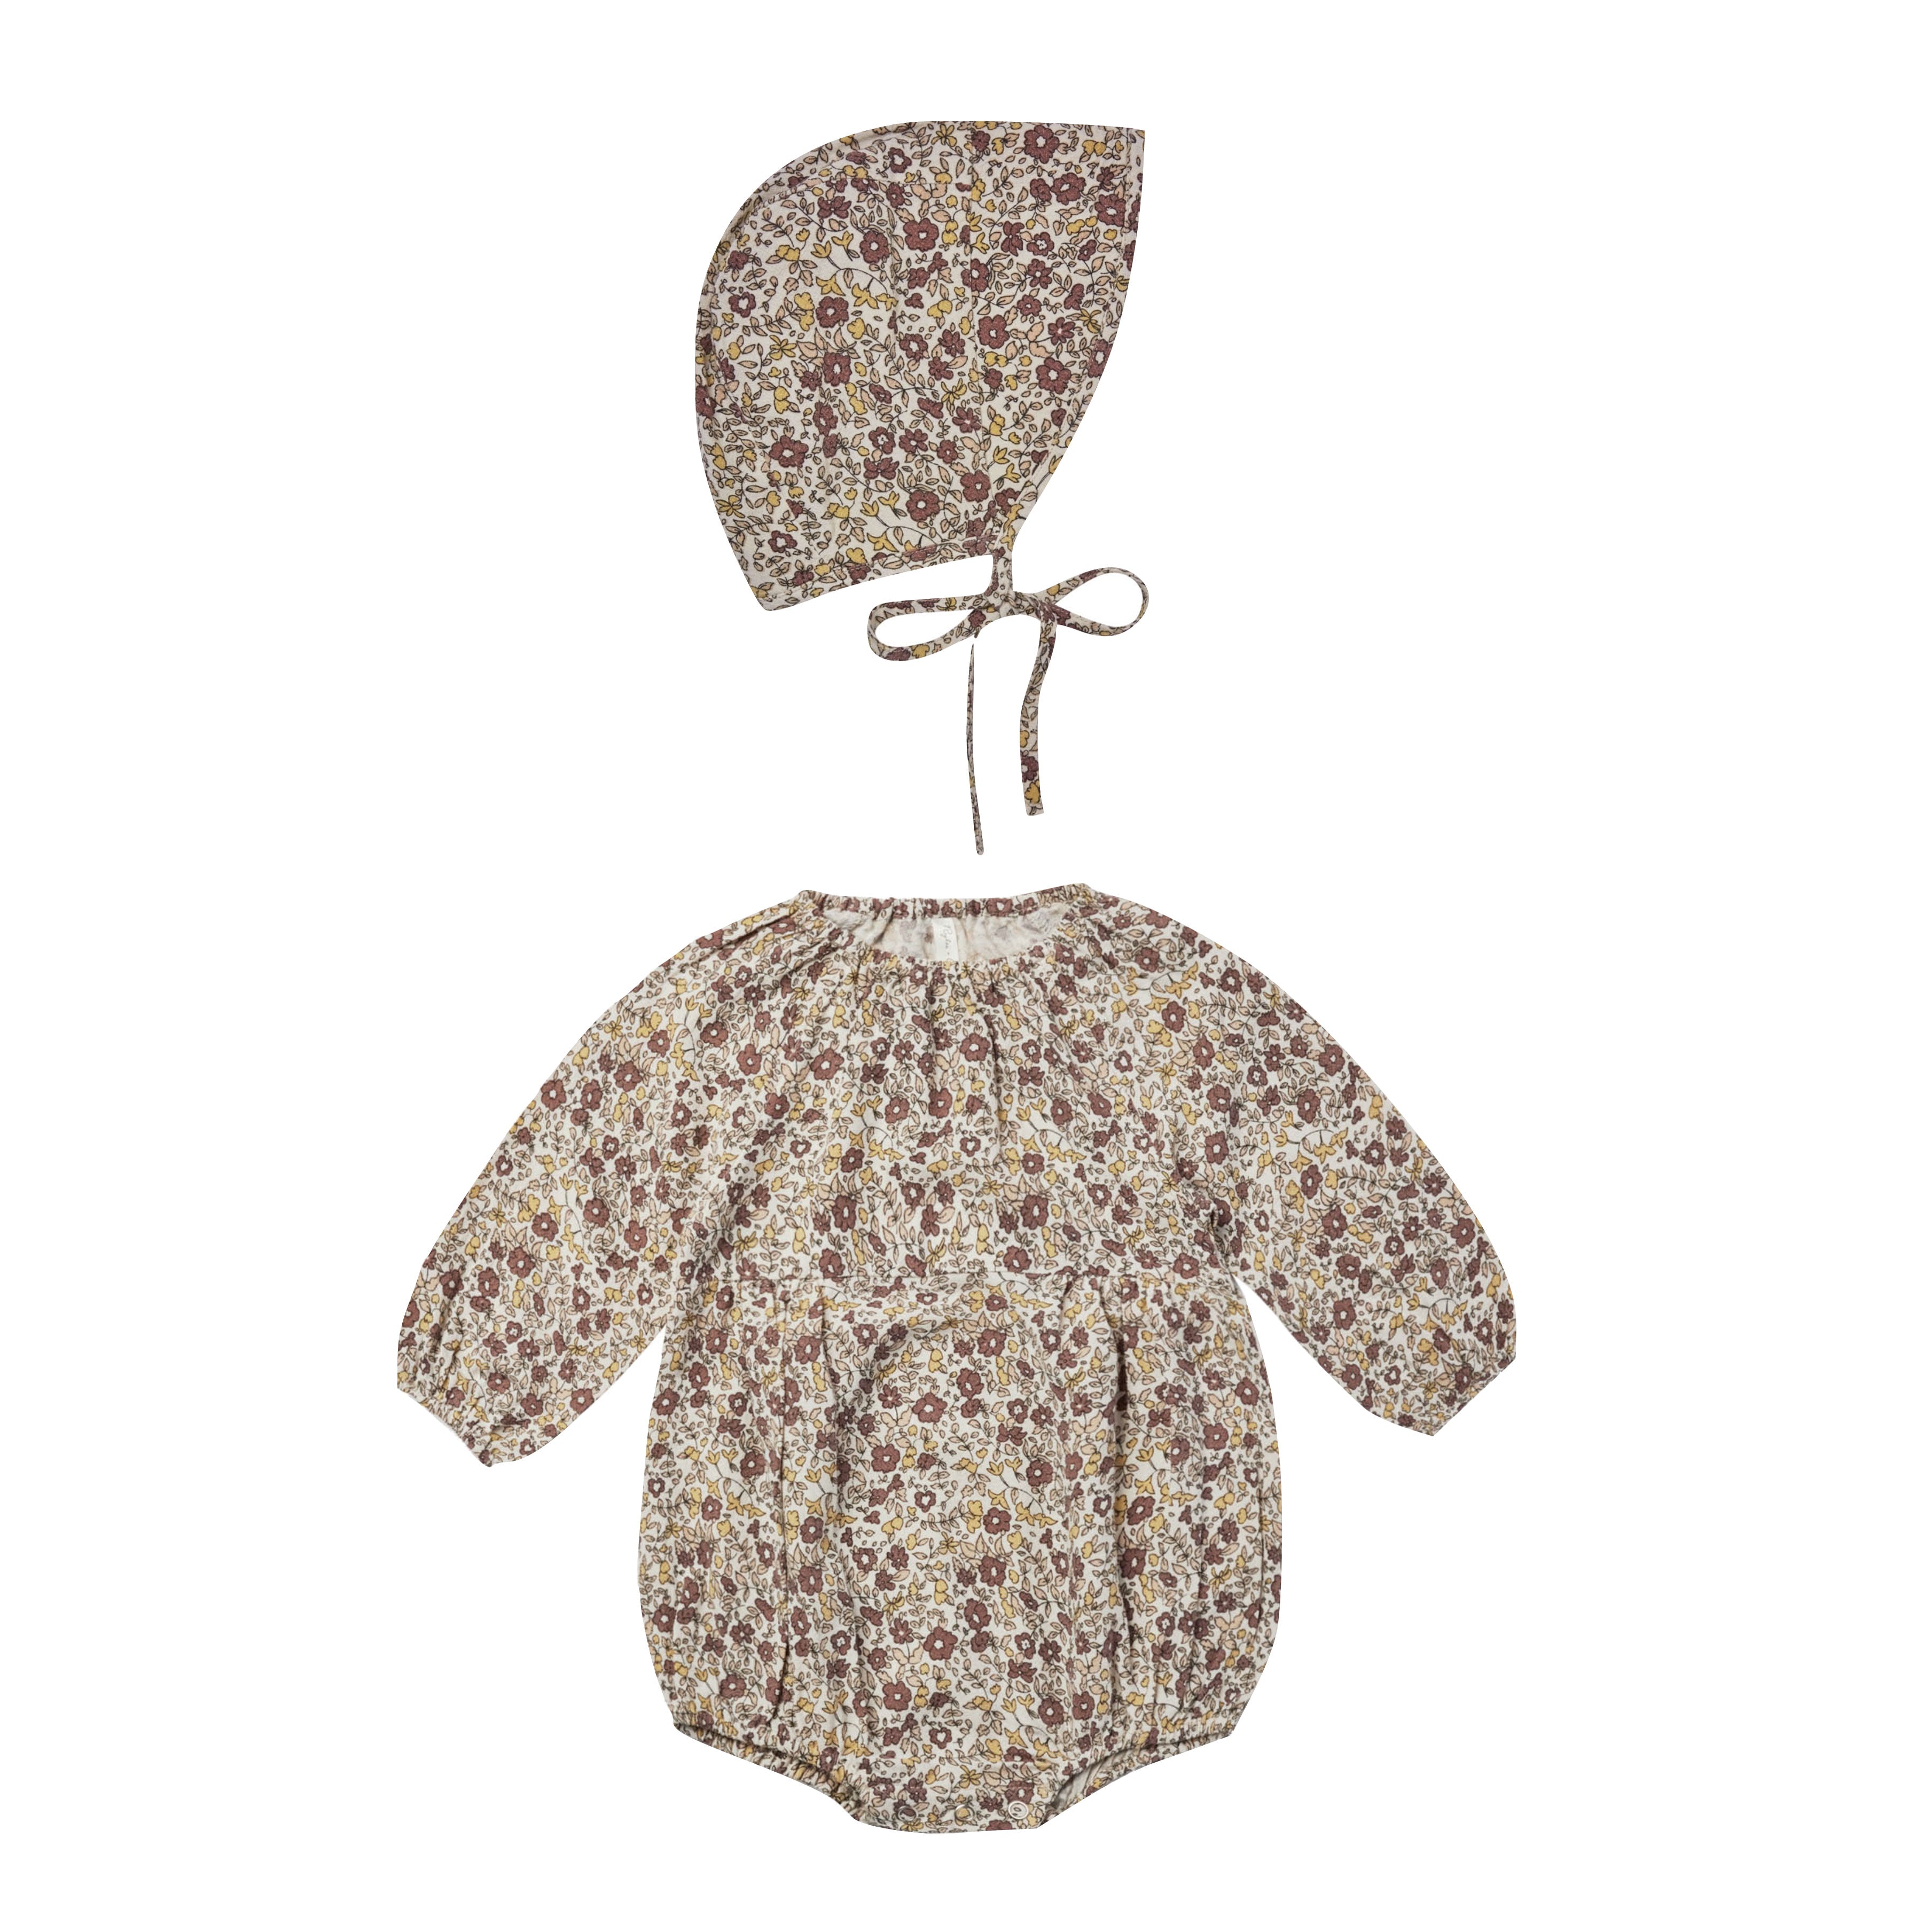 Exclusive Rylee and Cru gift set of a bubble romper and matching bonnet at Bonjour Baby Baskets